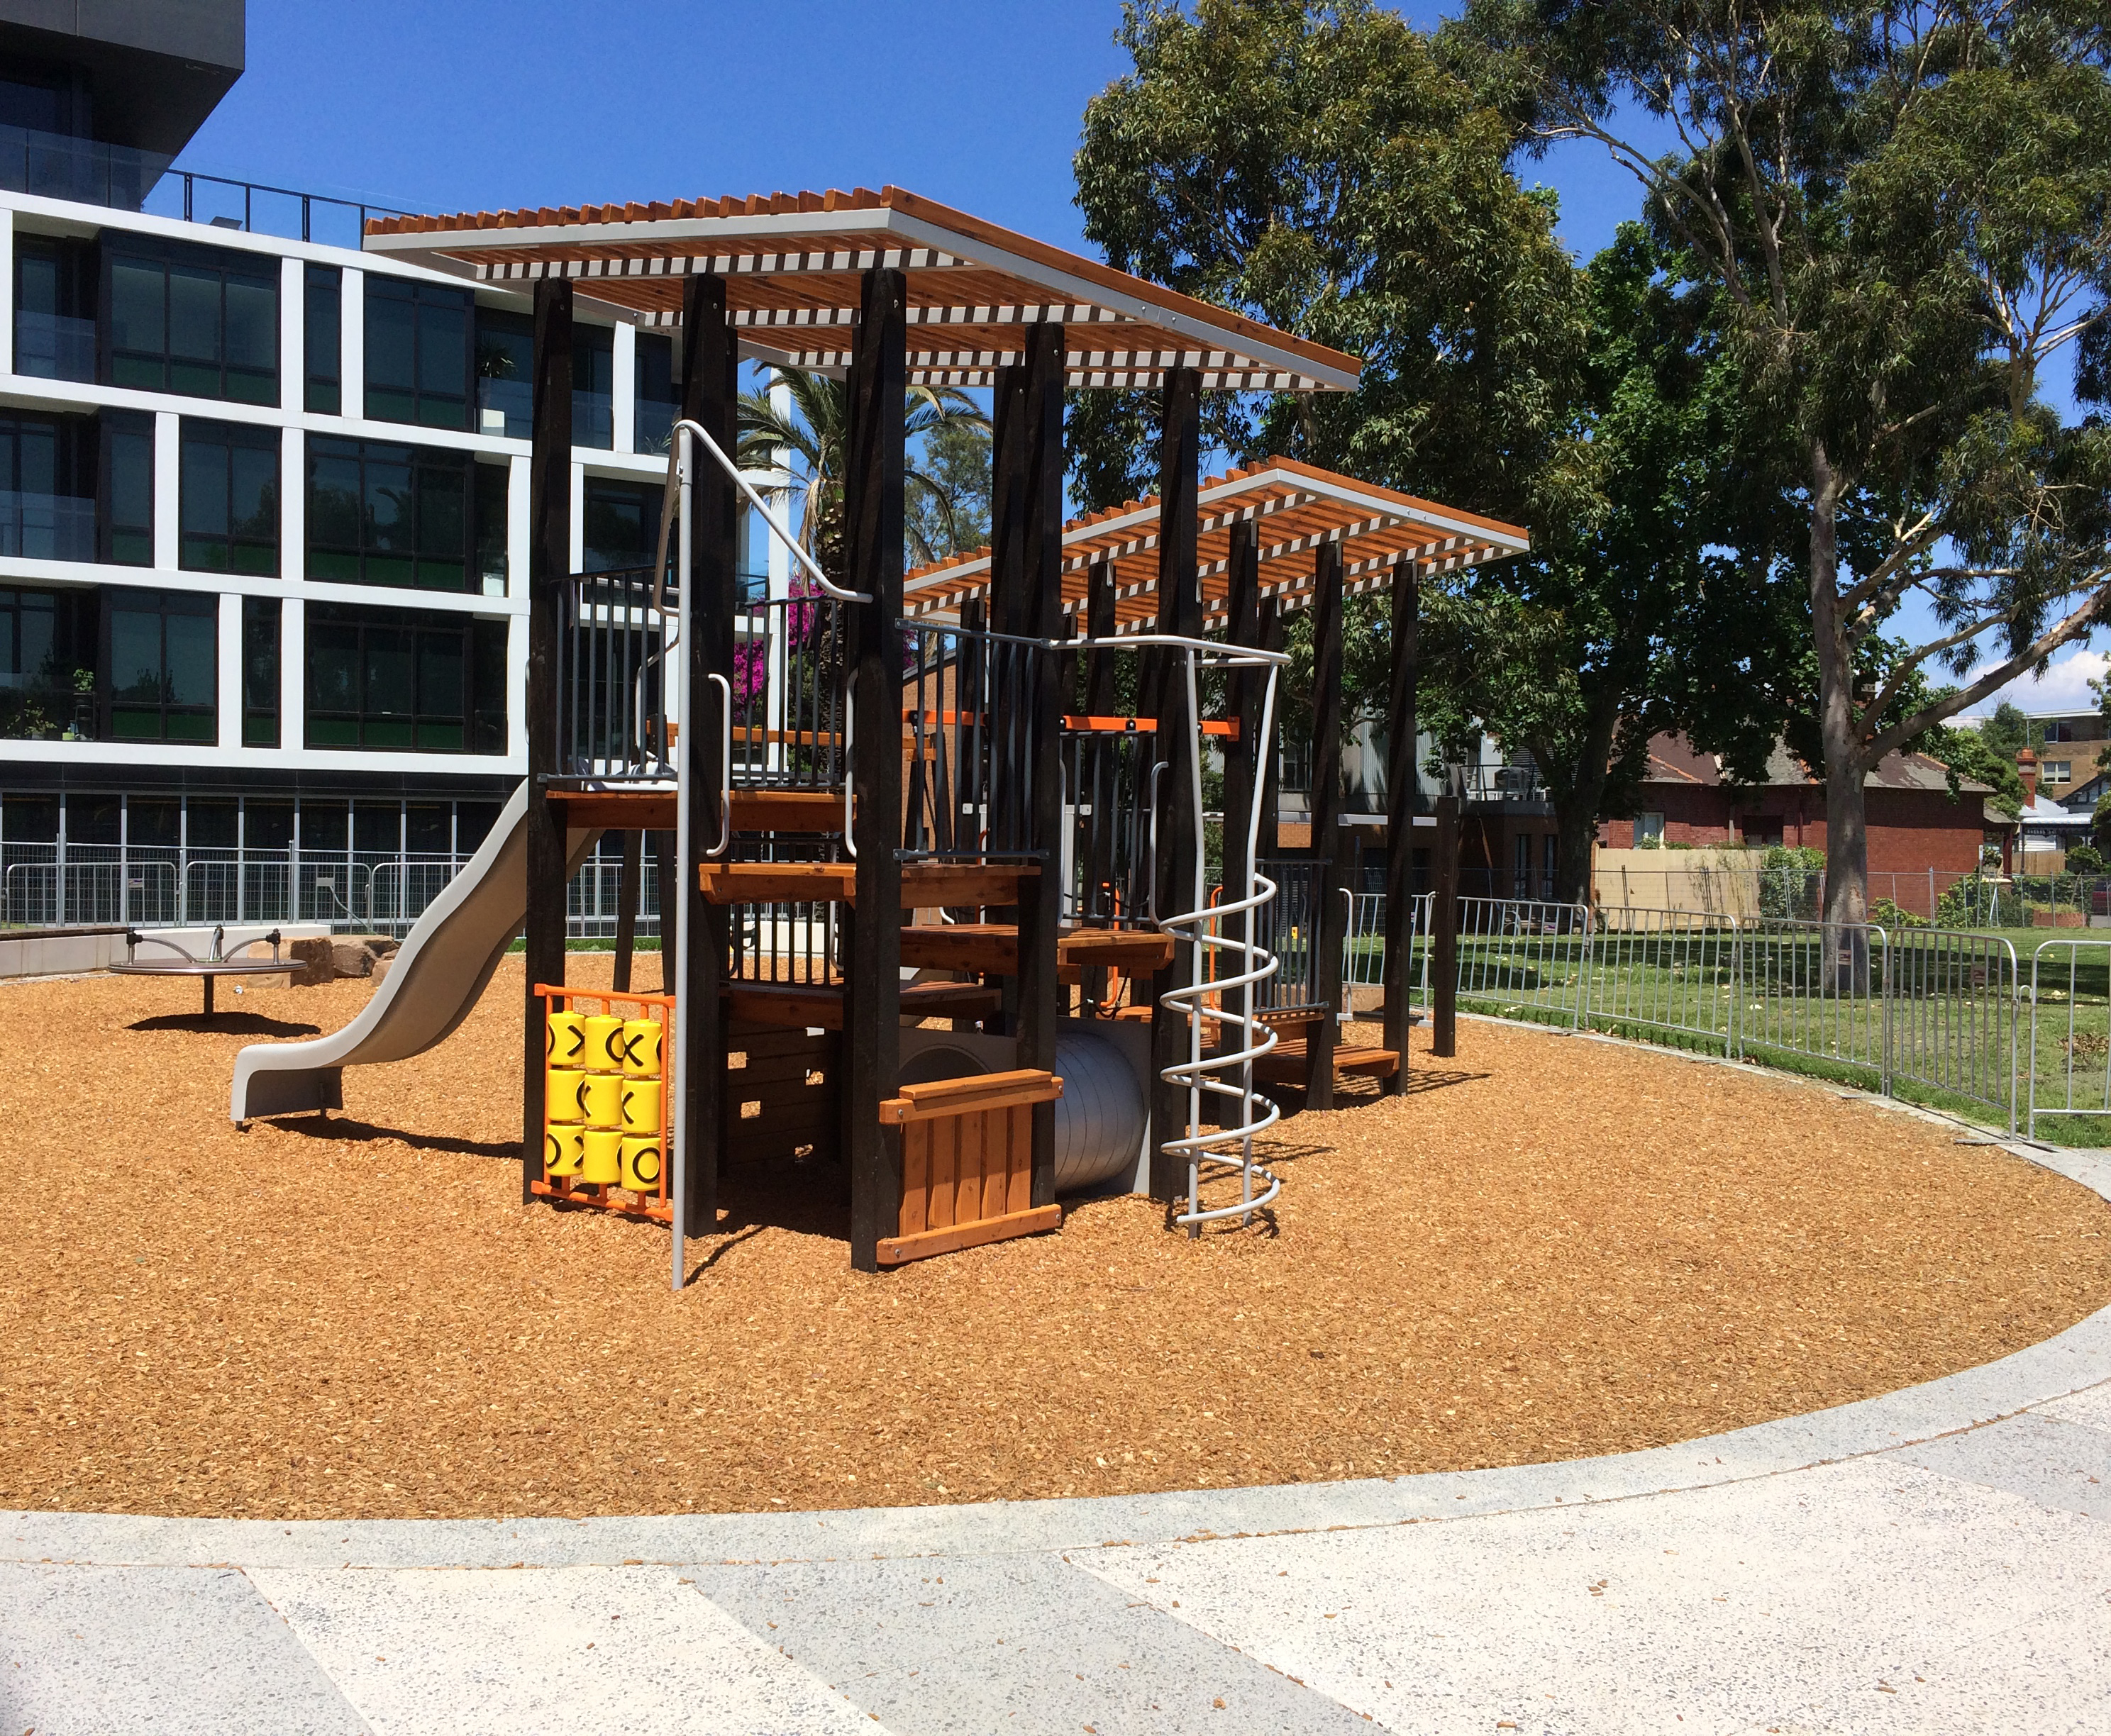 A new playground with apartments in the background